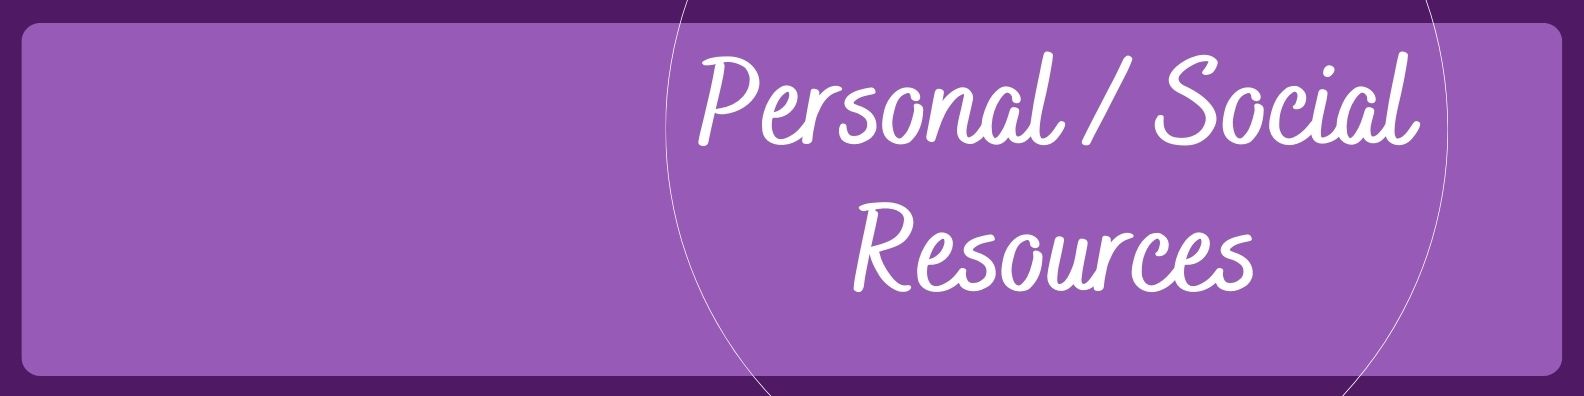 Personal/Social Resources